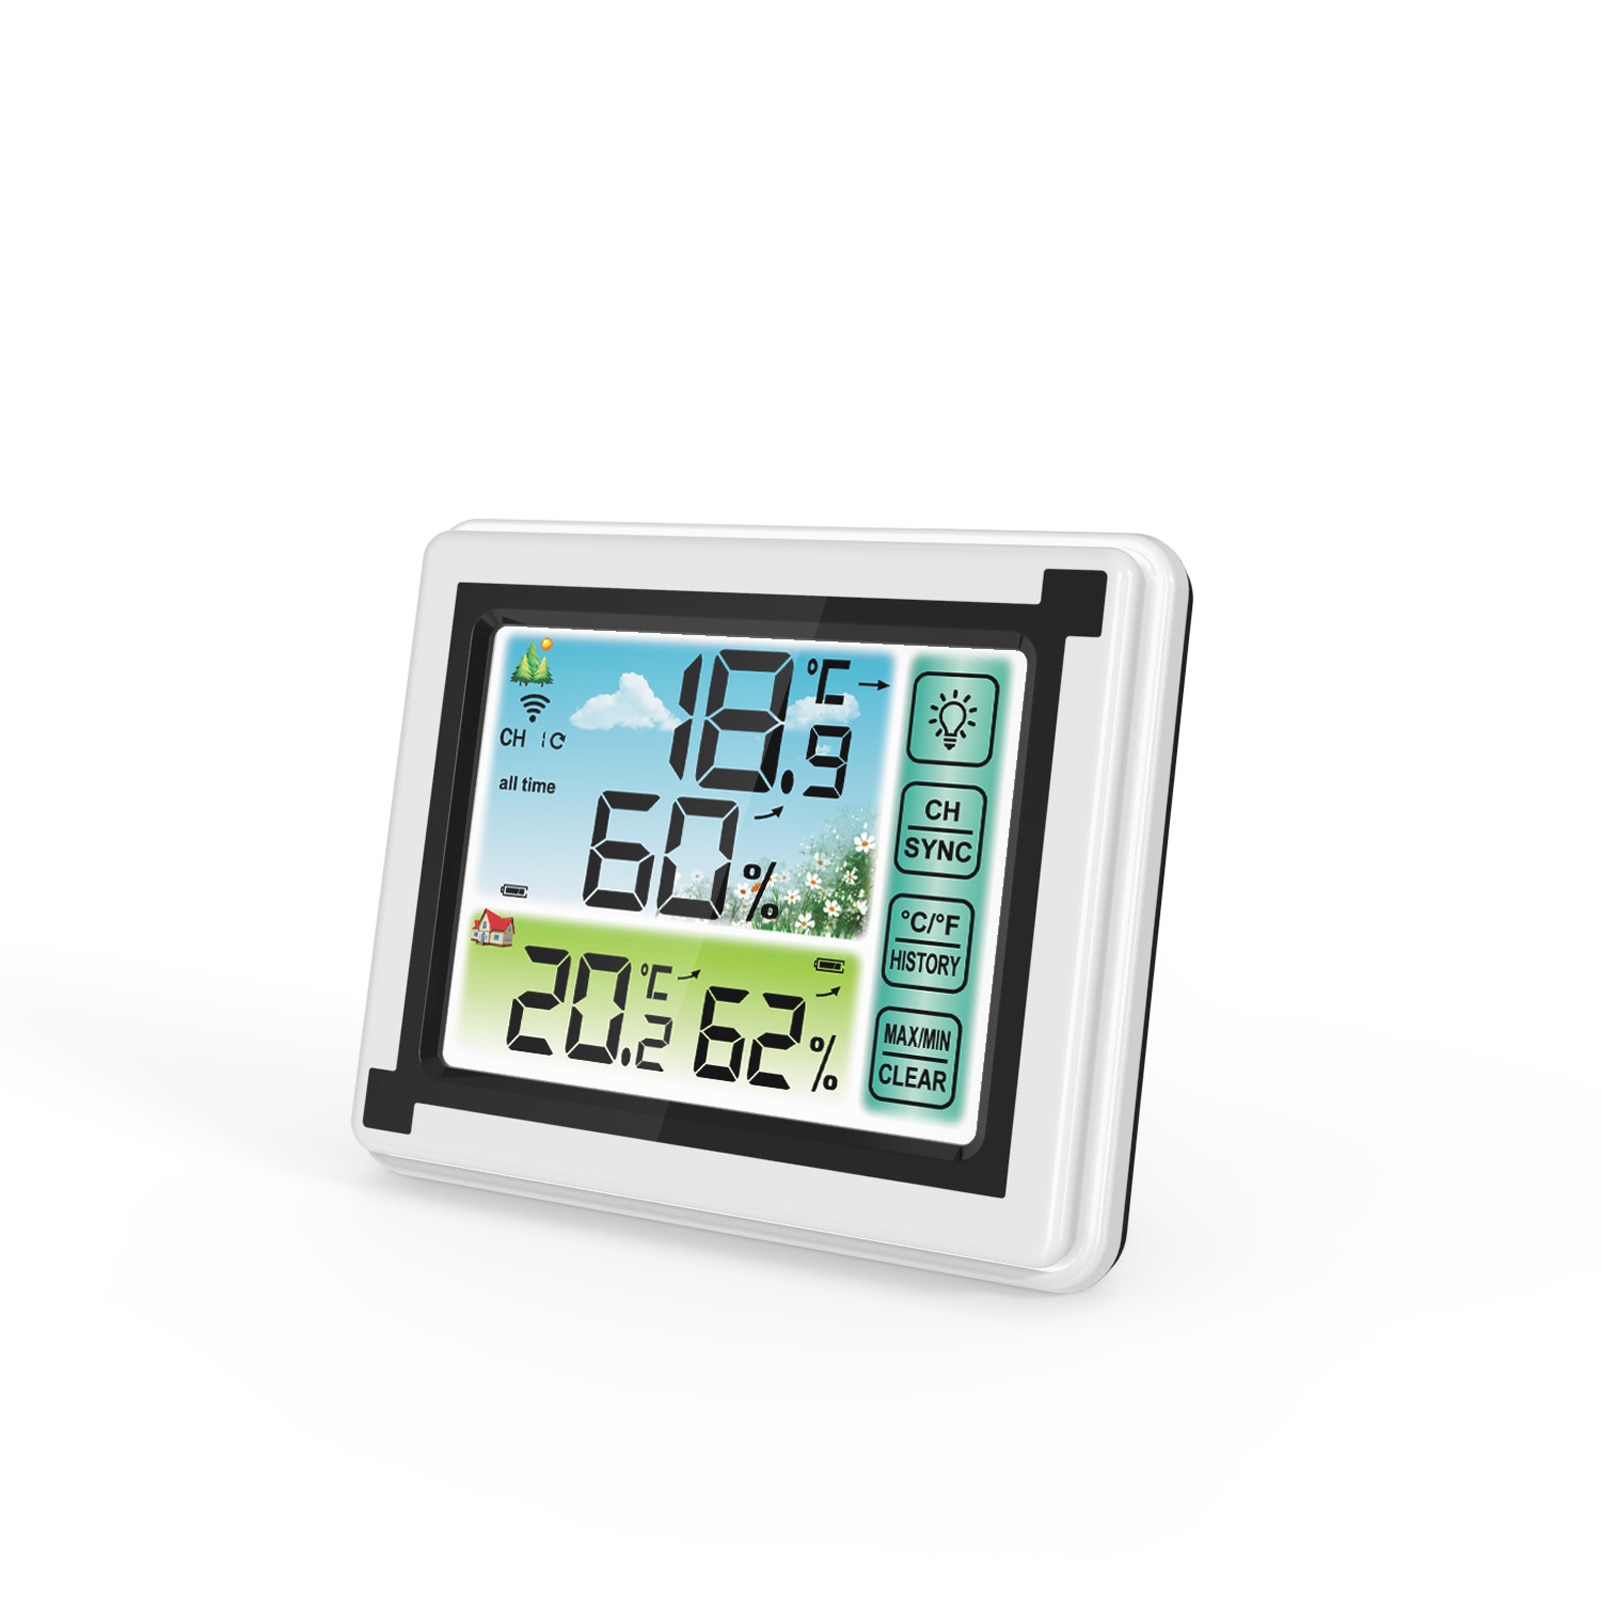 Indoor Outdoor Wireless Digital Thermohygrometer Temperature Mter Humidity Monitor Weather Station Clock Hygrometer